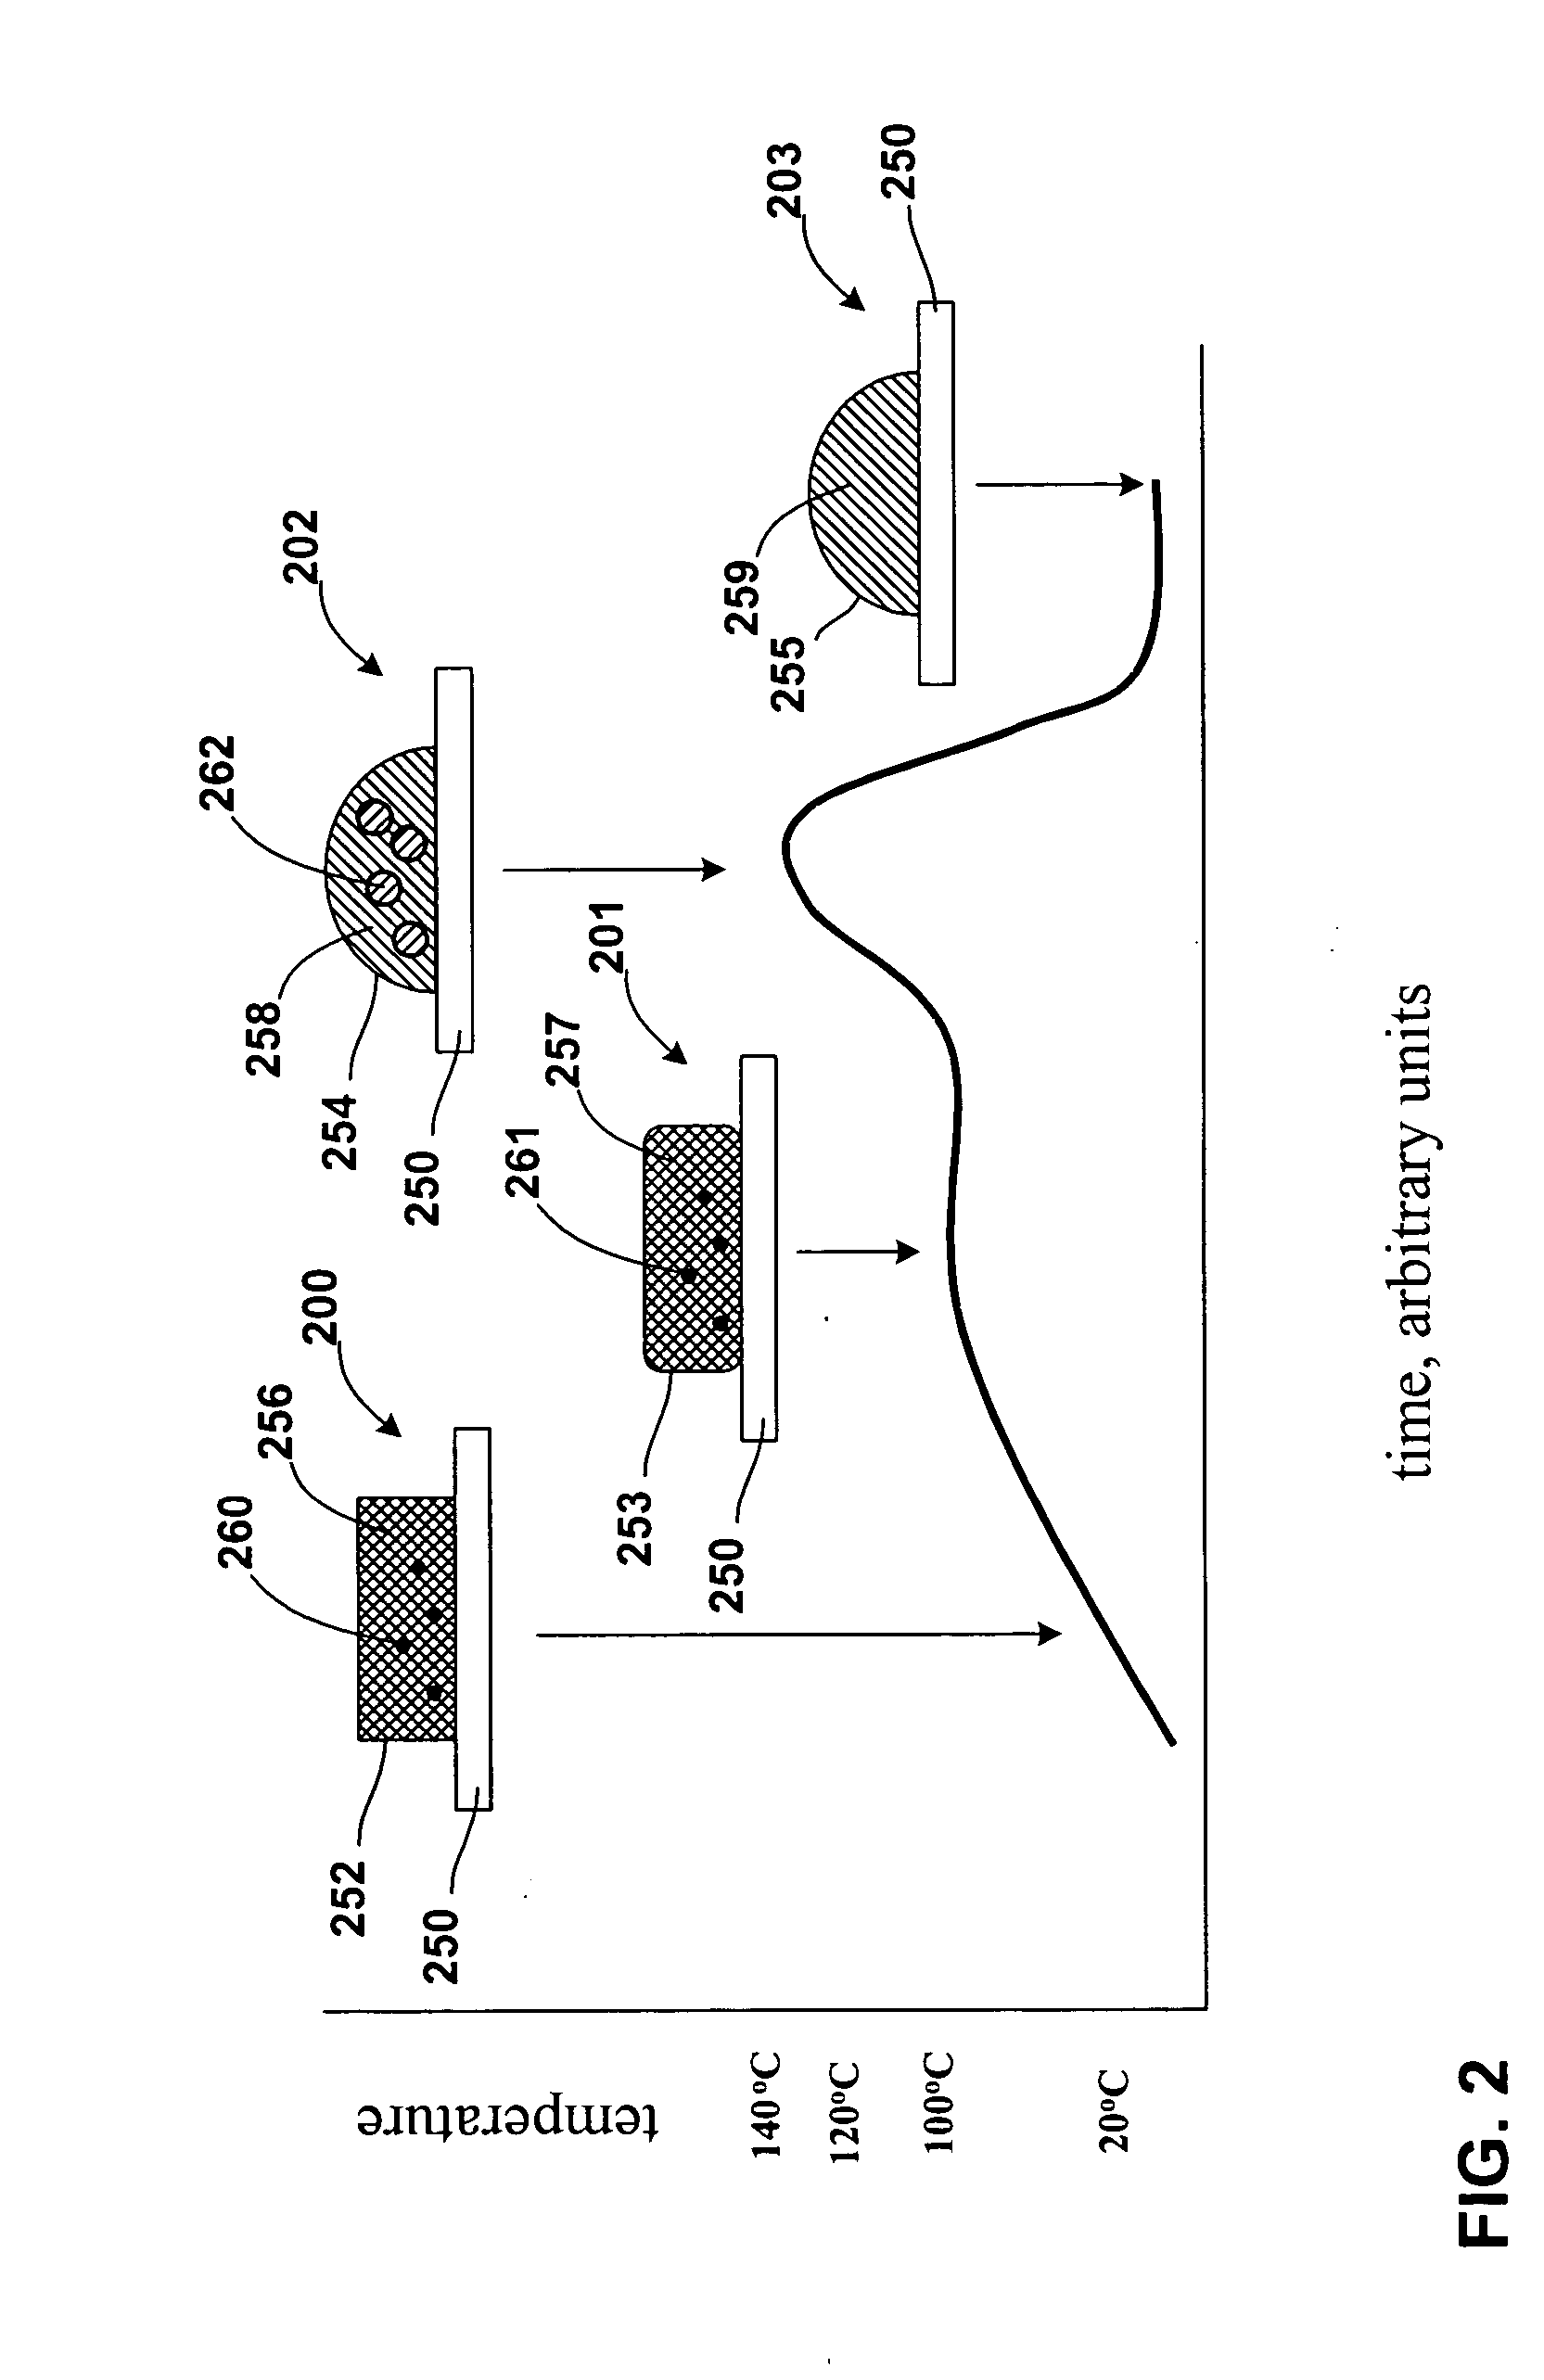 Stress-relief layers and stress-compensation collars with low-temperature solders for board-level joints, and processes of making same